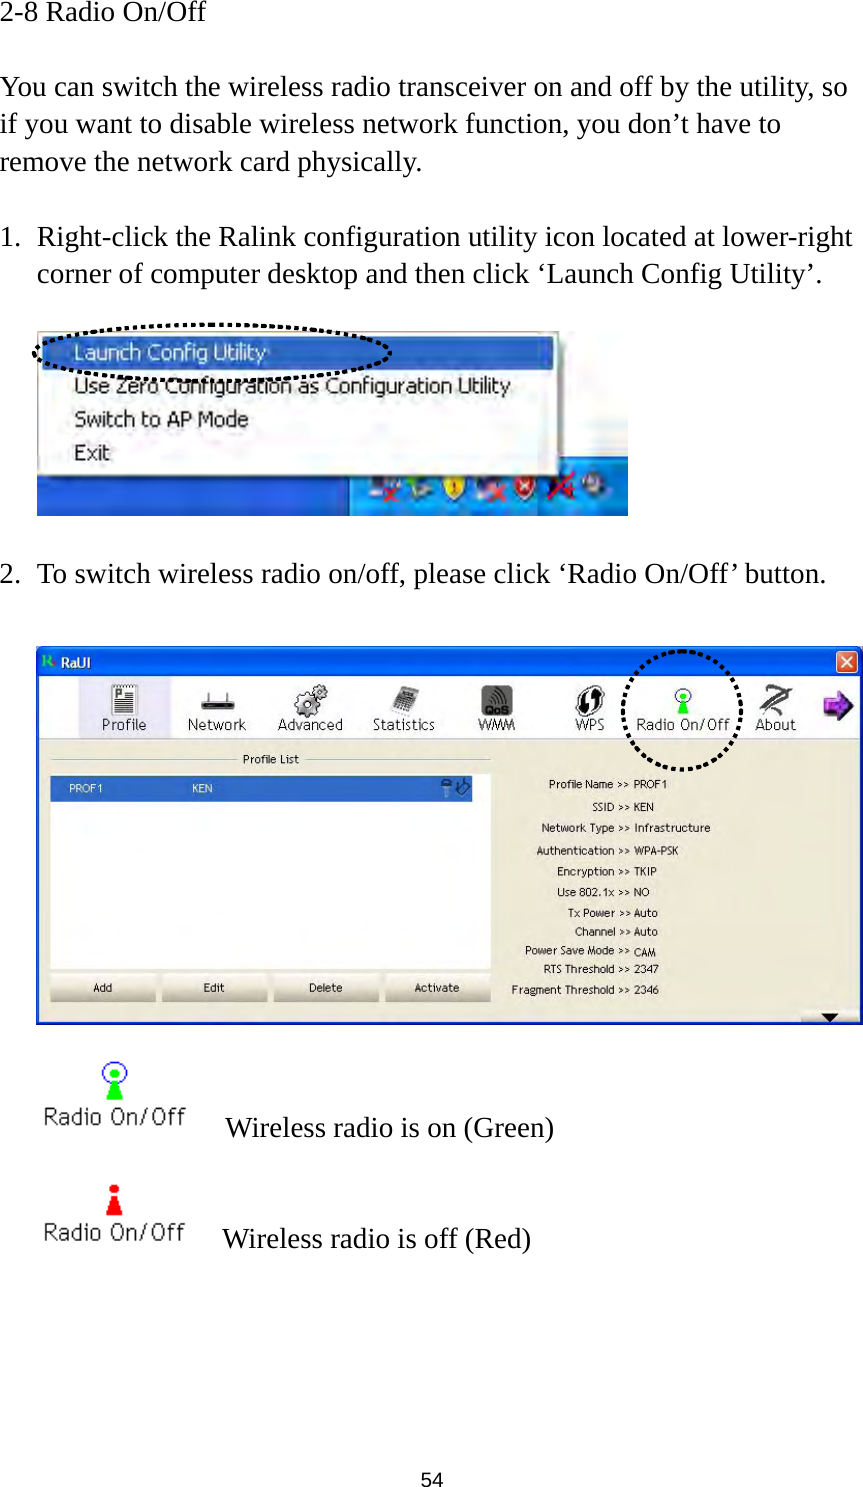  54 2-8 Radio On/Off  You can switch the wireless radio transceiver on and off by the utility, so if you want to disable wireless network function, you don’t have to remove the network card physically.  1. Right-click the Ralink configuration utility icon located at lower-right corner of computer desktop and then click ‘Launch Config Utility’.    2. To switch wireless radio on/off, please click ‘Radio On/Off’ button.       Wireless radio is on (Green)     Wireless radio is off (Red) 